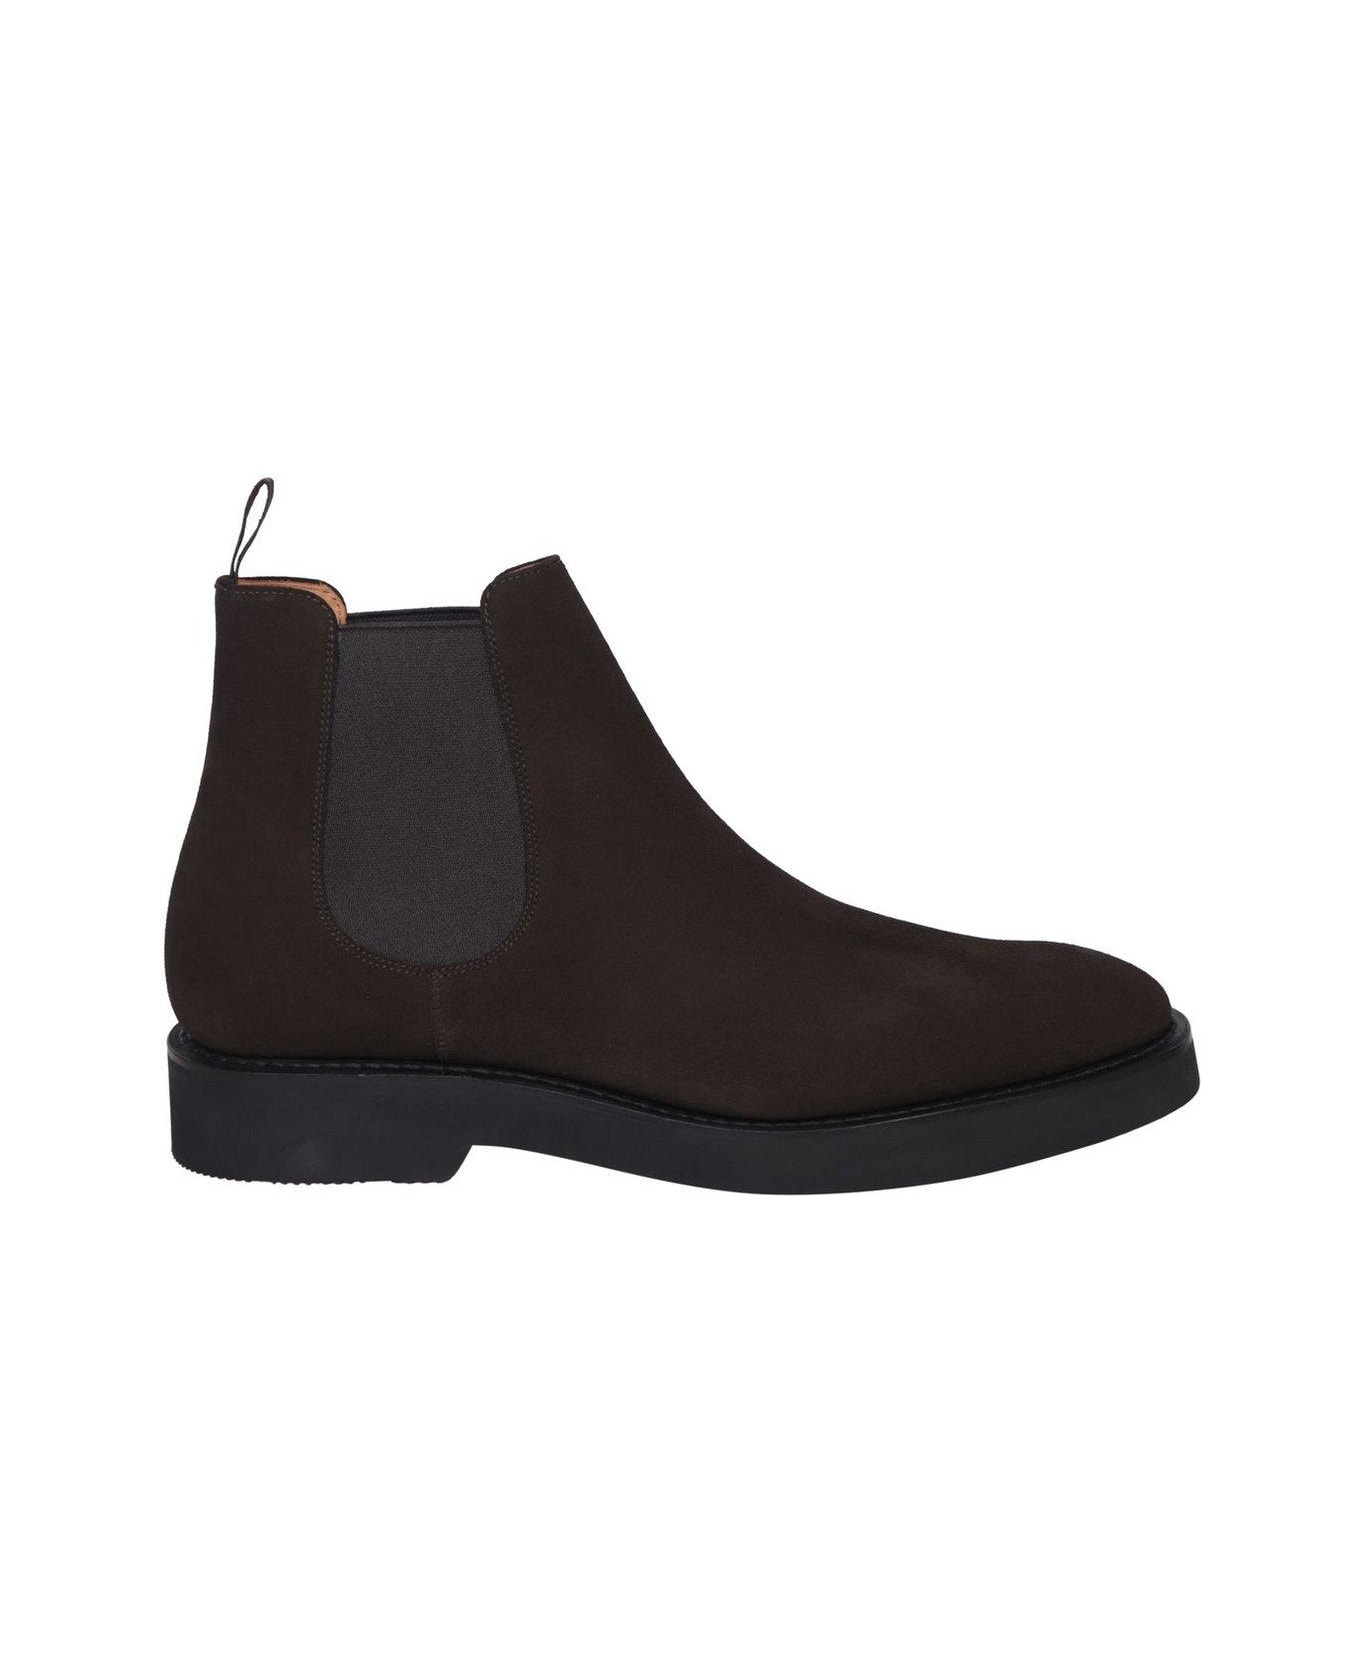 Church's Round Toe Chelsea Boots - Brown